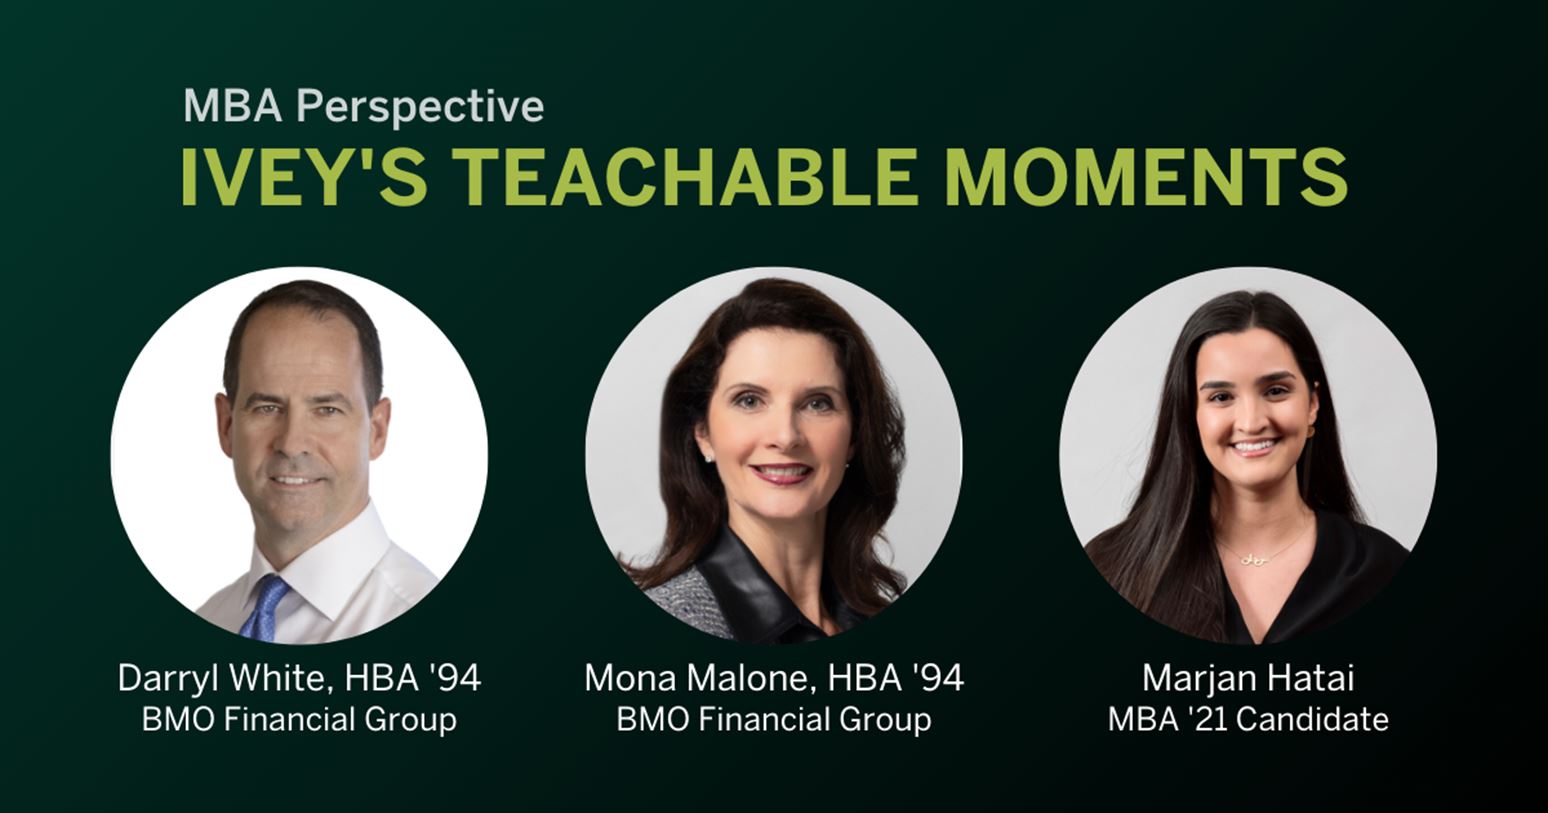 BMO leaders share lessons for facing challenges head-on